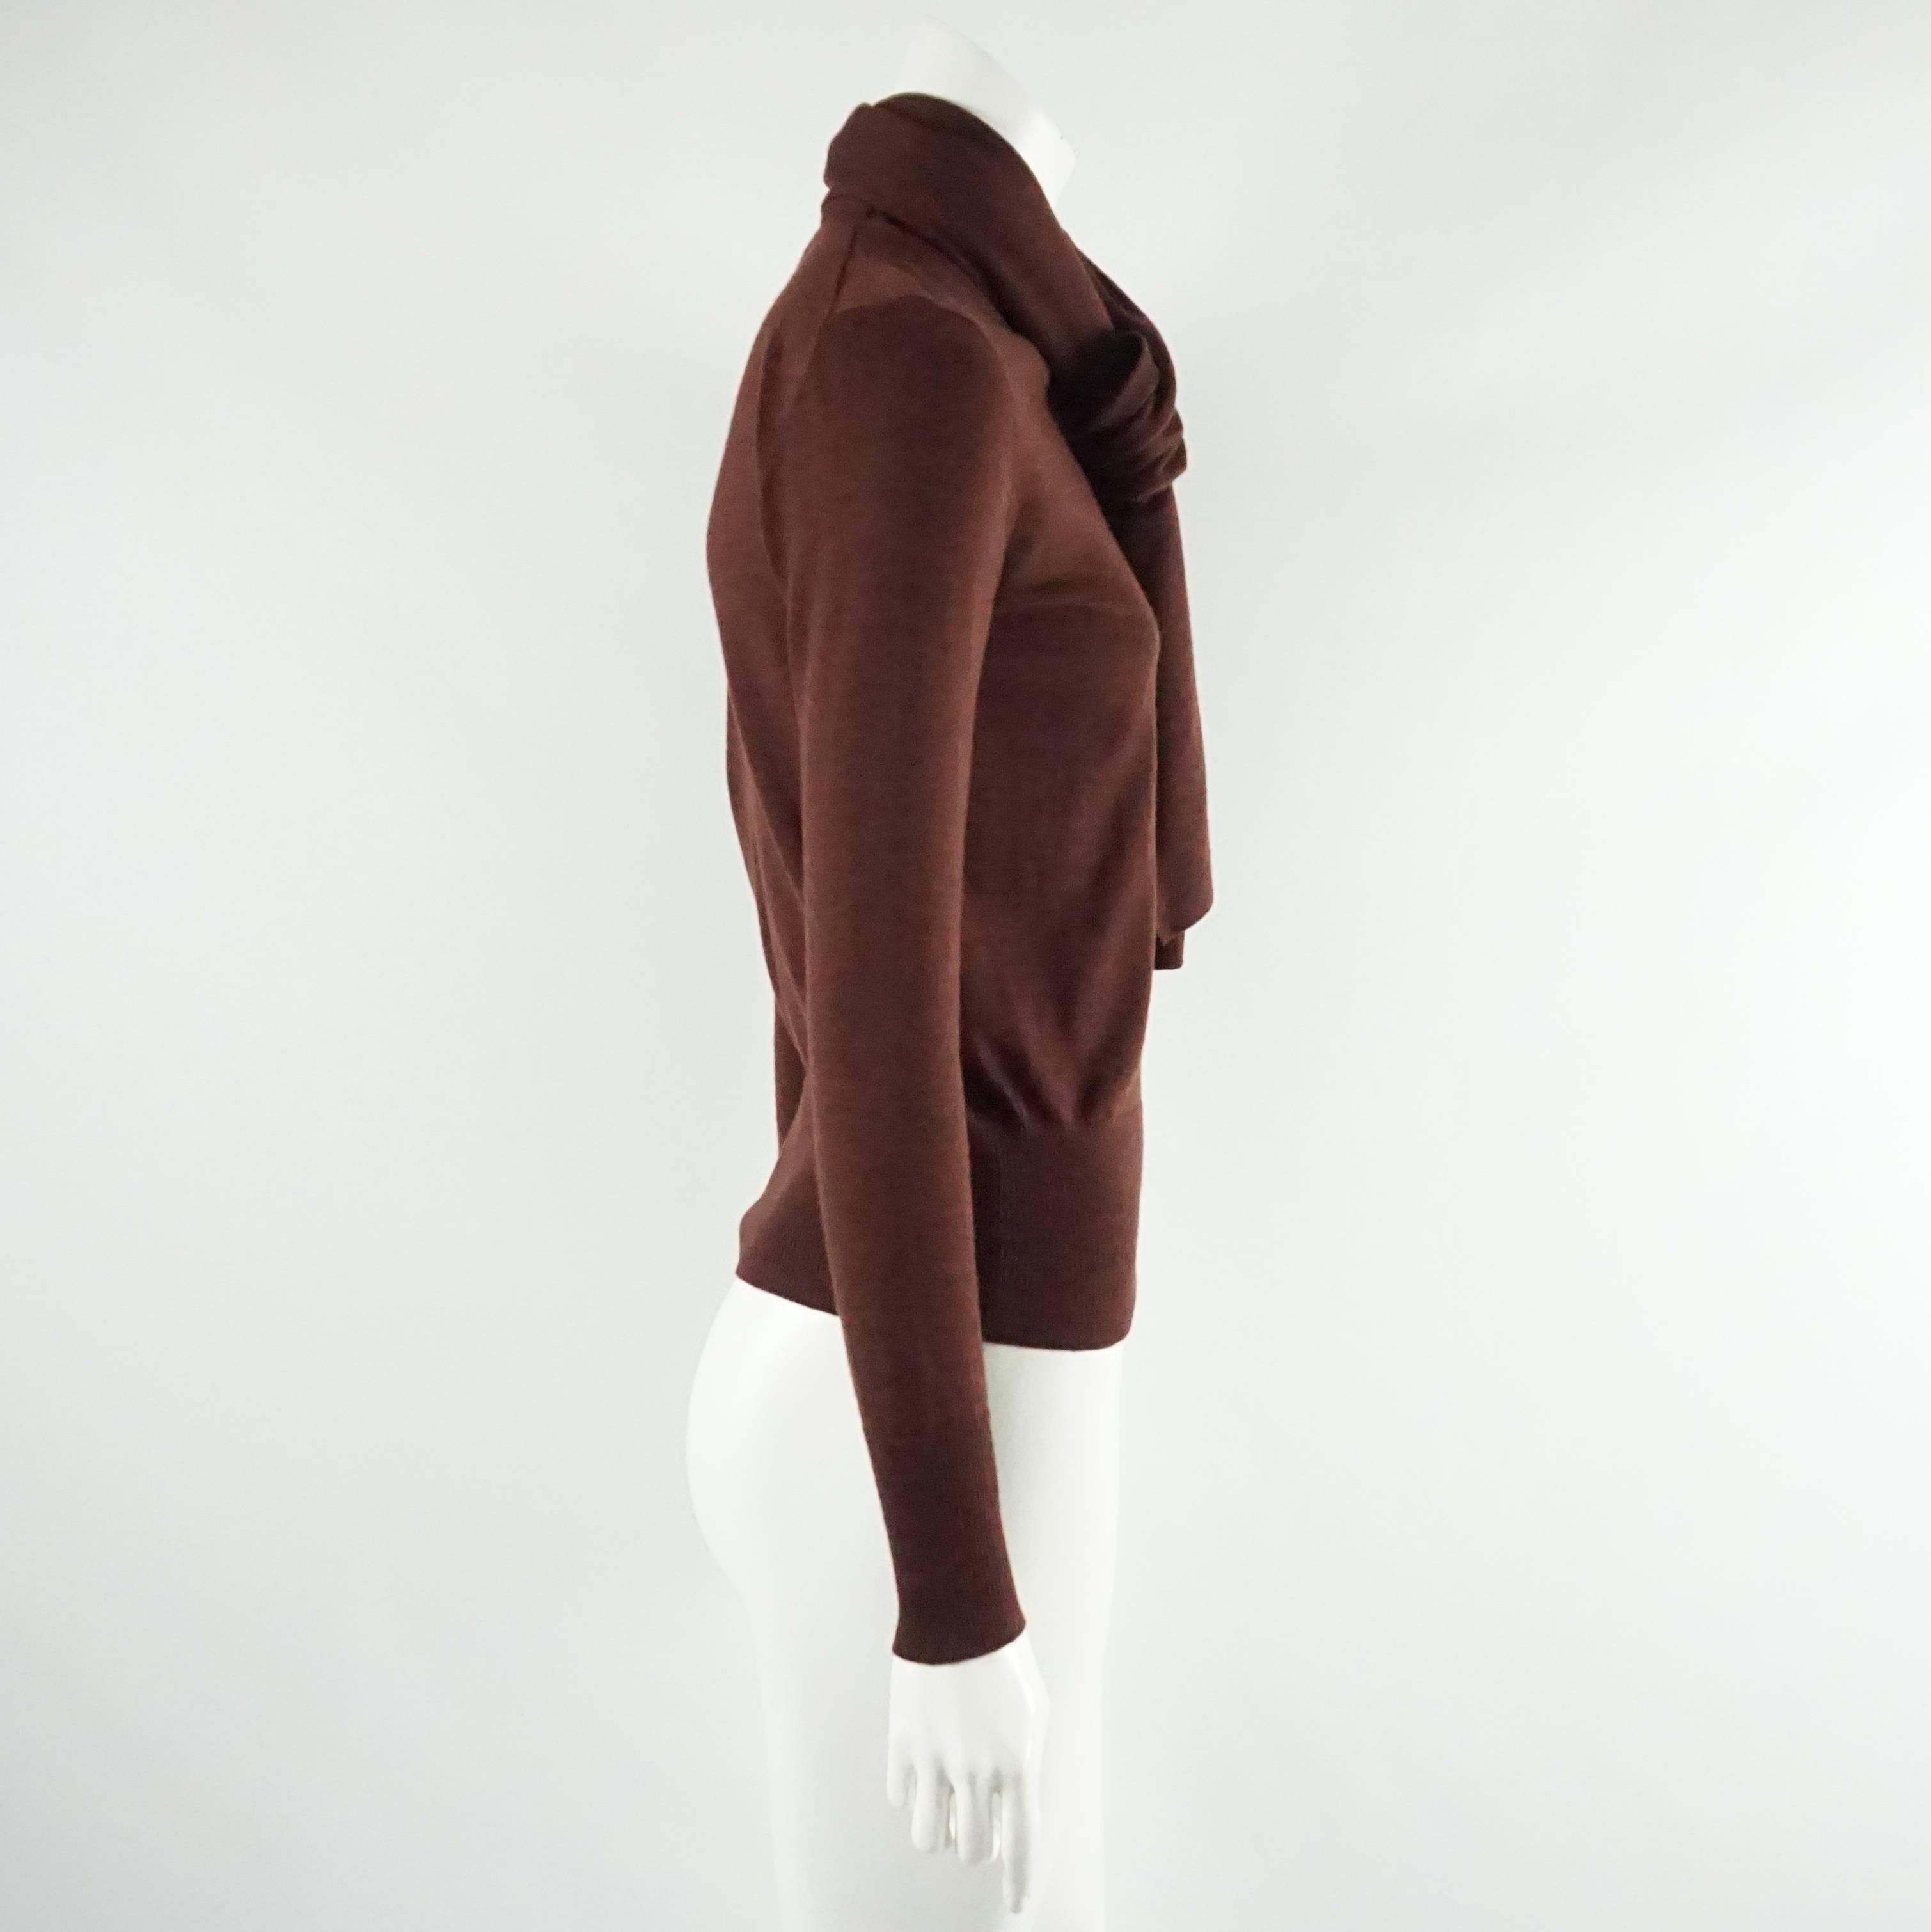 This Hermes burgundy cashmere sweater is a round neck style with an attached folded scarf piece around the neck (cannot be removed). It is in excellent condition with very minor wear. Size 40, circa 2000's. 

Measurements
Shoulder to Shoulder: 15